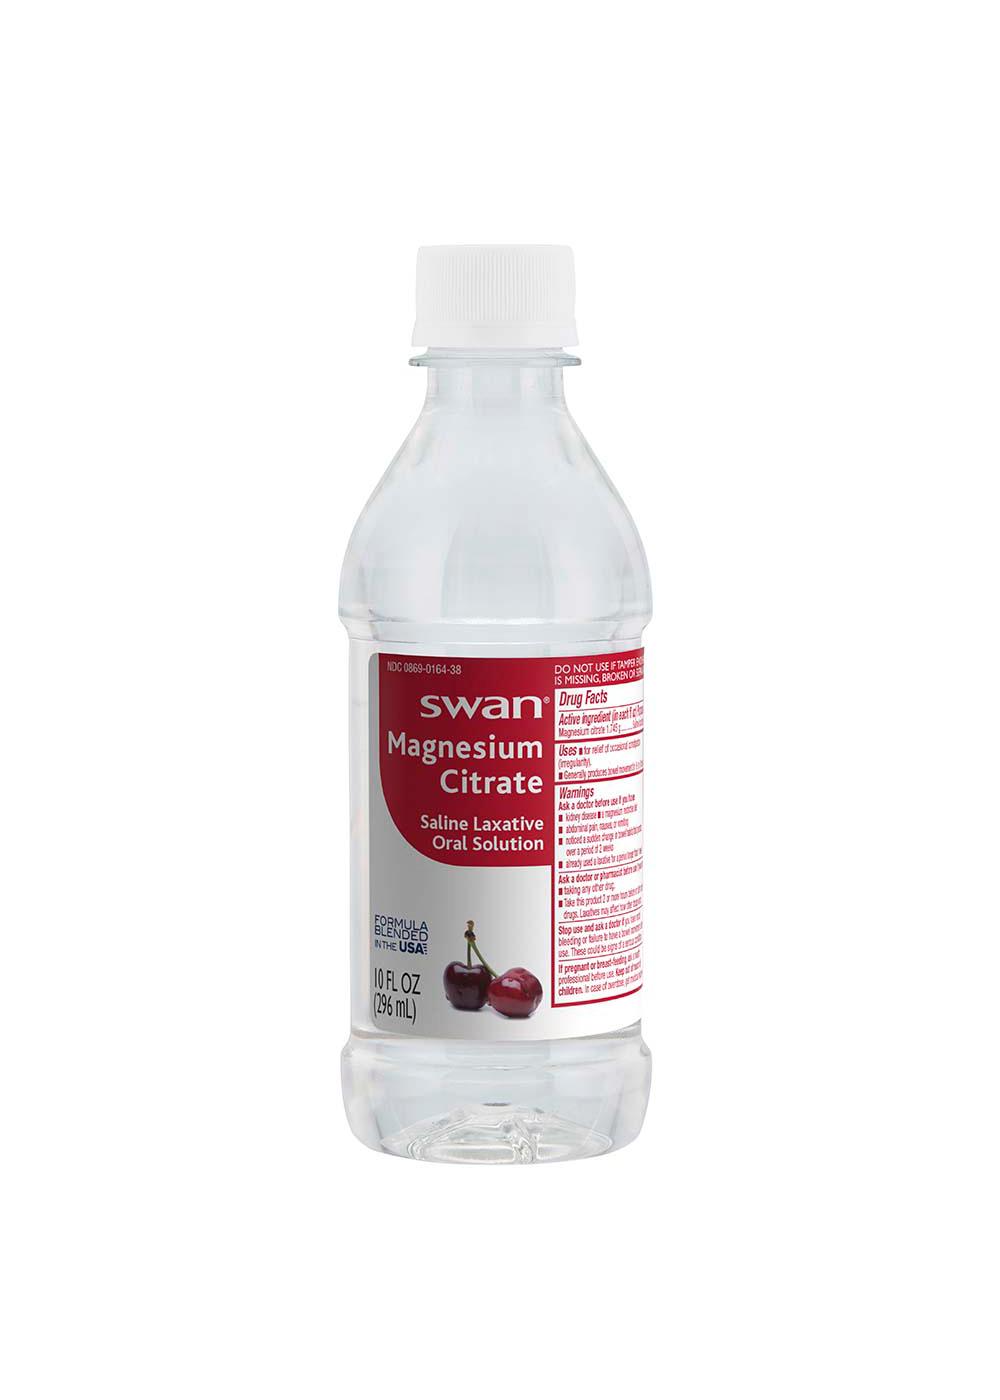 Swan Magnesium Citrate Oral Solution - Cherry; image 1 of 3